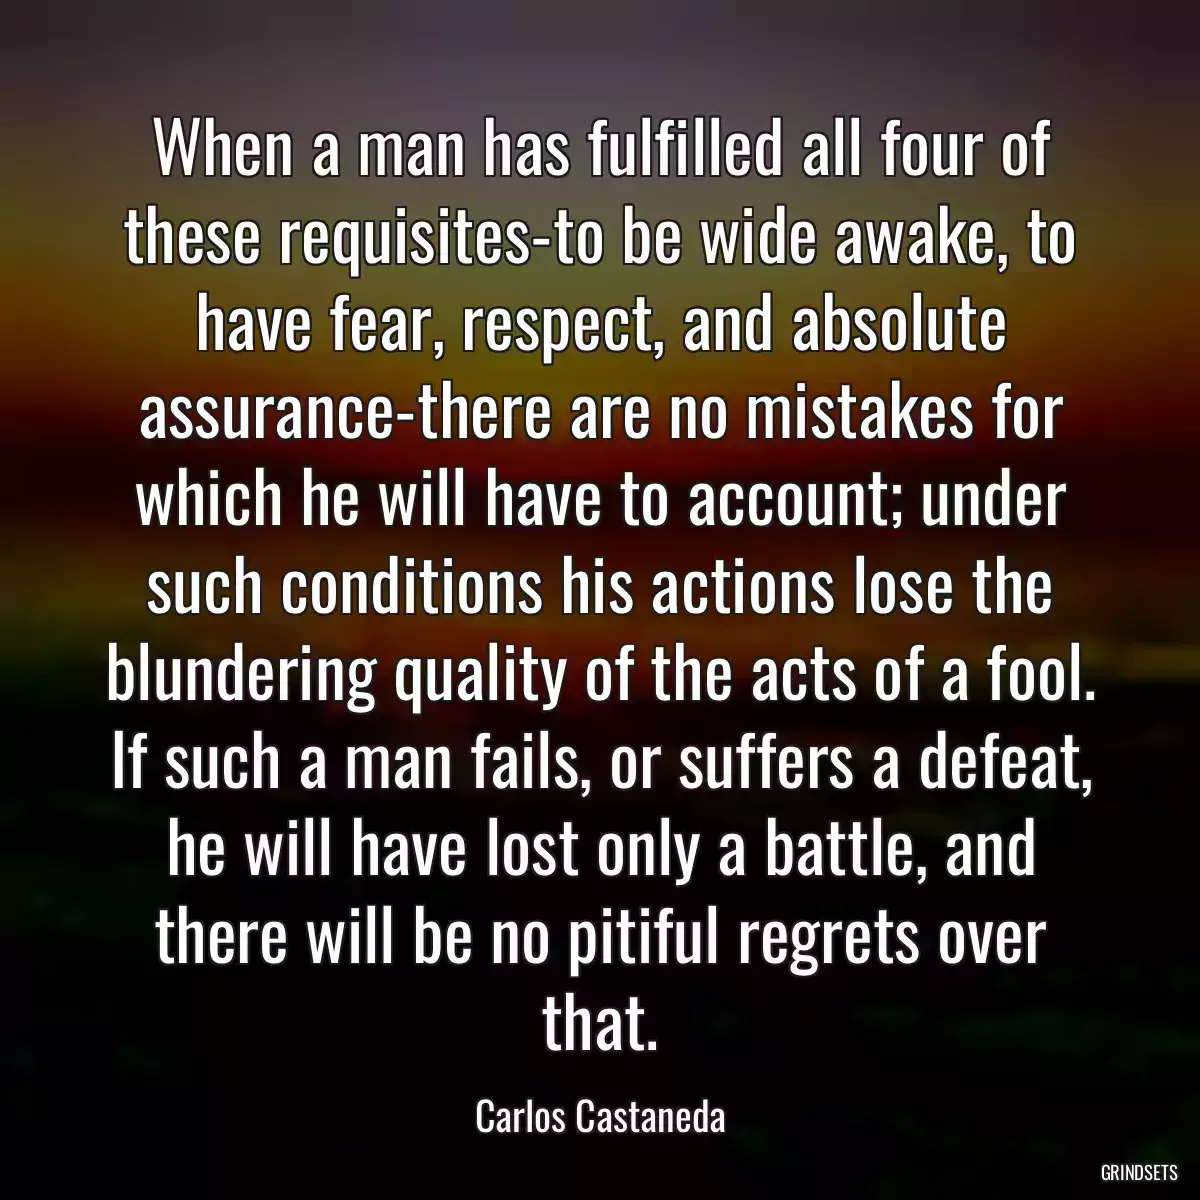 When a man has fulfilled all four of these requisites-to be wide awake, to have fear, respect, and absolute assurance-there are no mistakes for which he will have to account; under such conditions his actions lose the blundering quality of the acts of a fool. If such a man fails, or suffers a defeat, he will have lost only a battle, and there will be no pitiful regrets over that.